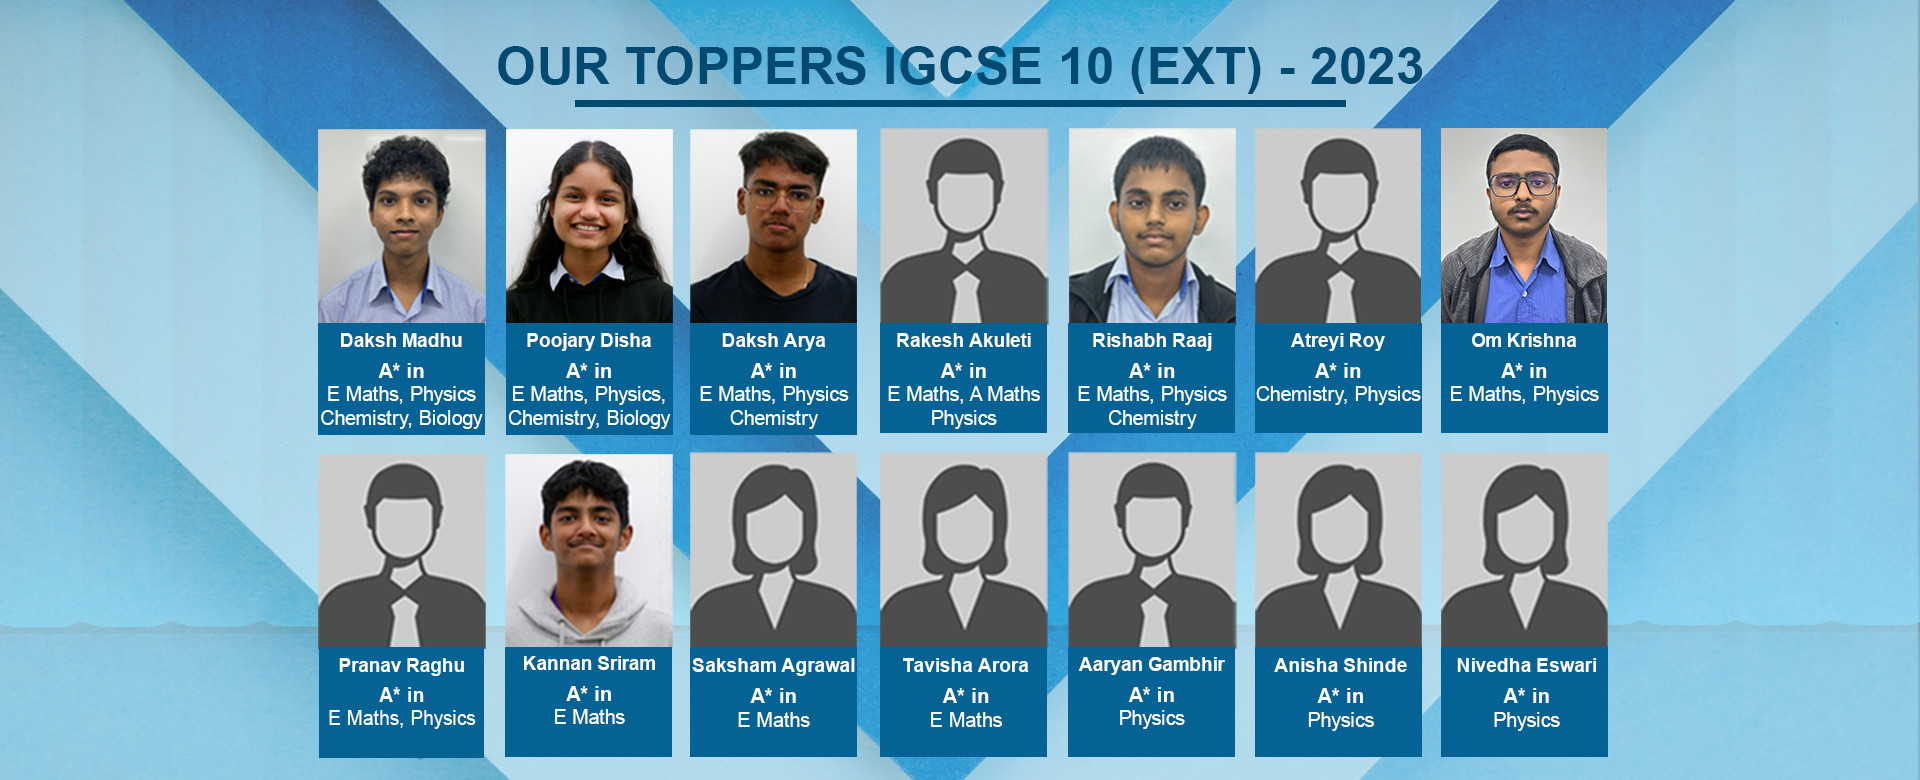 Our IGCSE 10 E-Maths Toppers - 2023